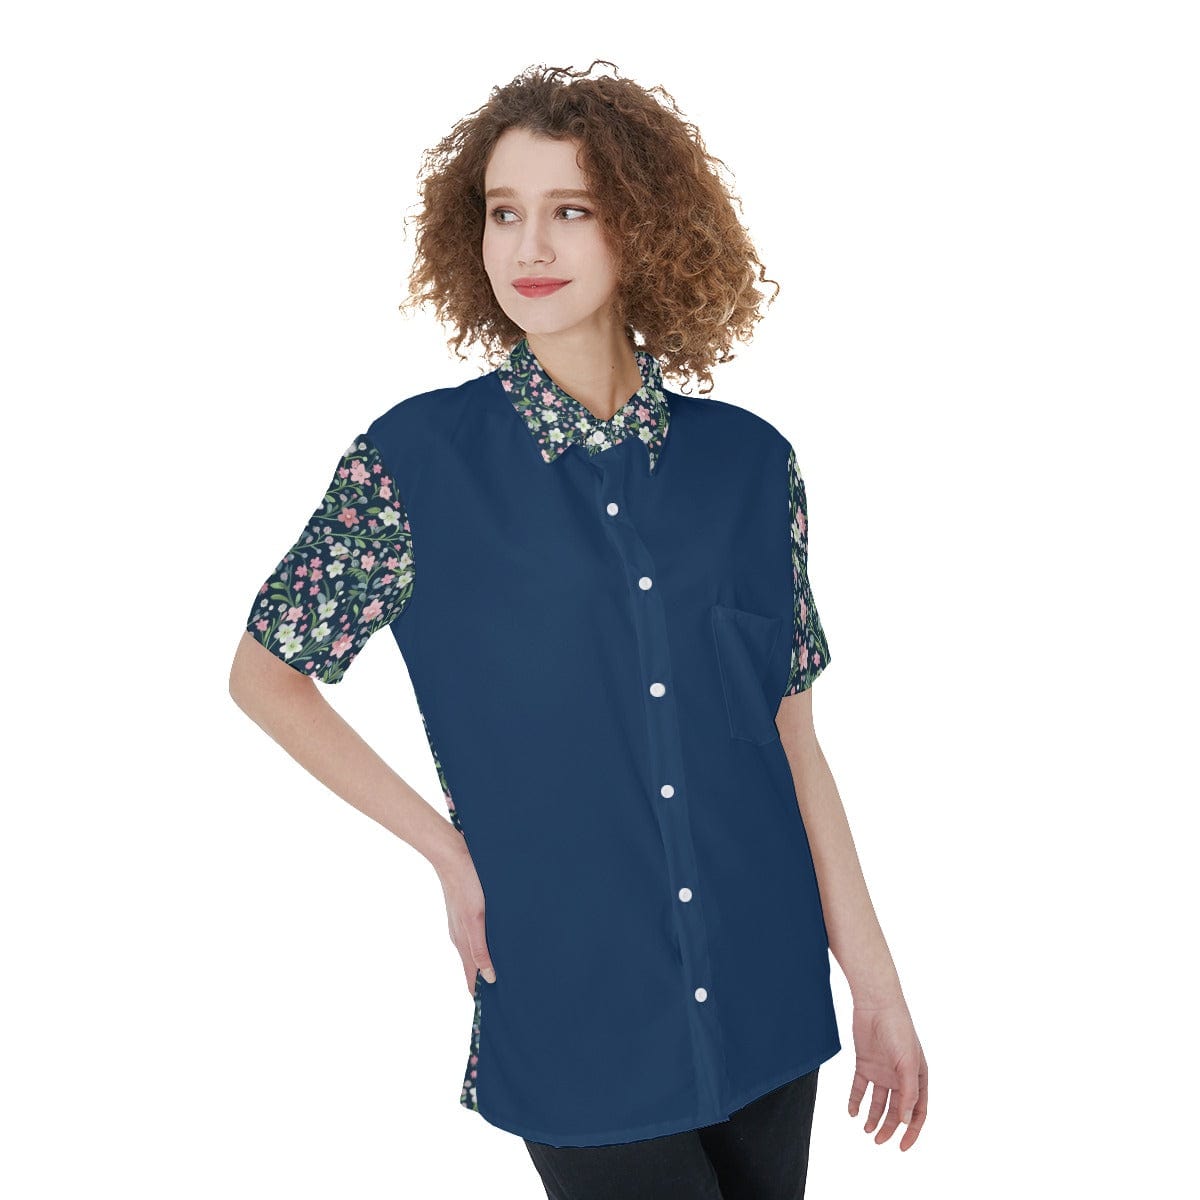 Yoycol Navy Floral Hue - Women's Short Sleeve Shirt With Pocket